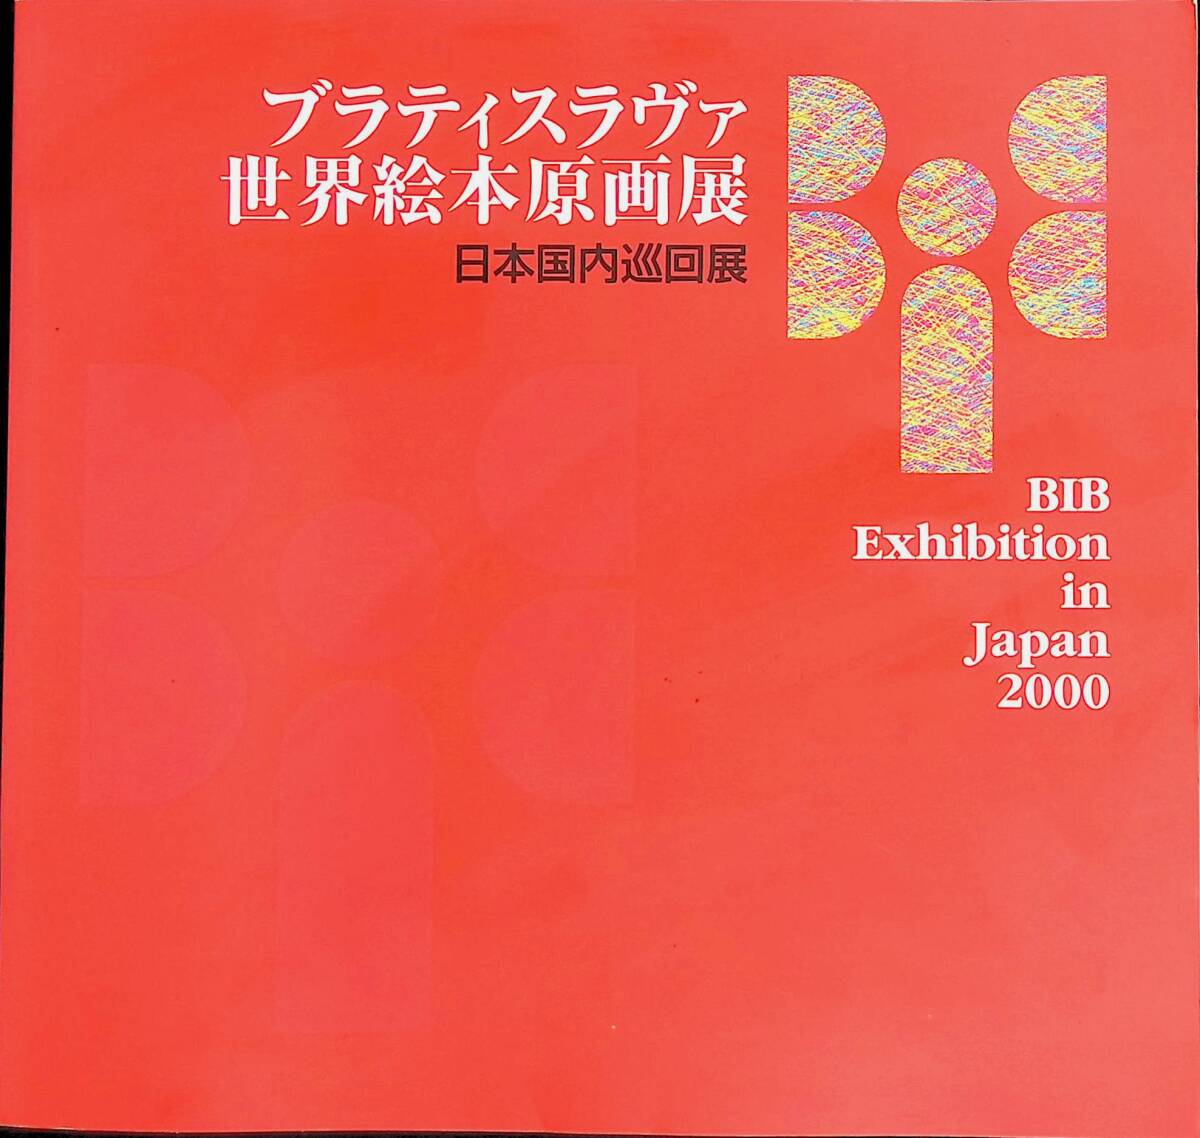 Catalog of the Bratislava World Children's Book Fair, Japan National Tour Exhibition, International Board on Books for Young People, 2000, YB240418M1, Painting, Art Book, Collection, Catalog